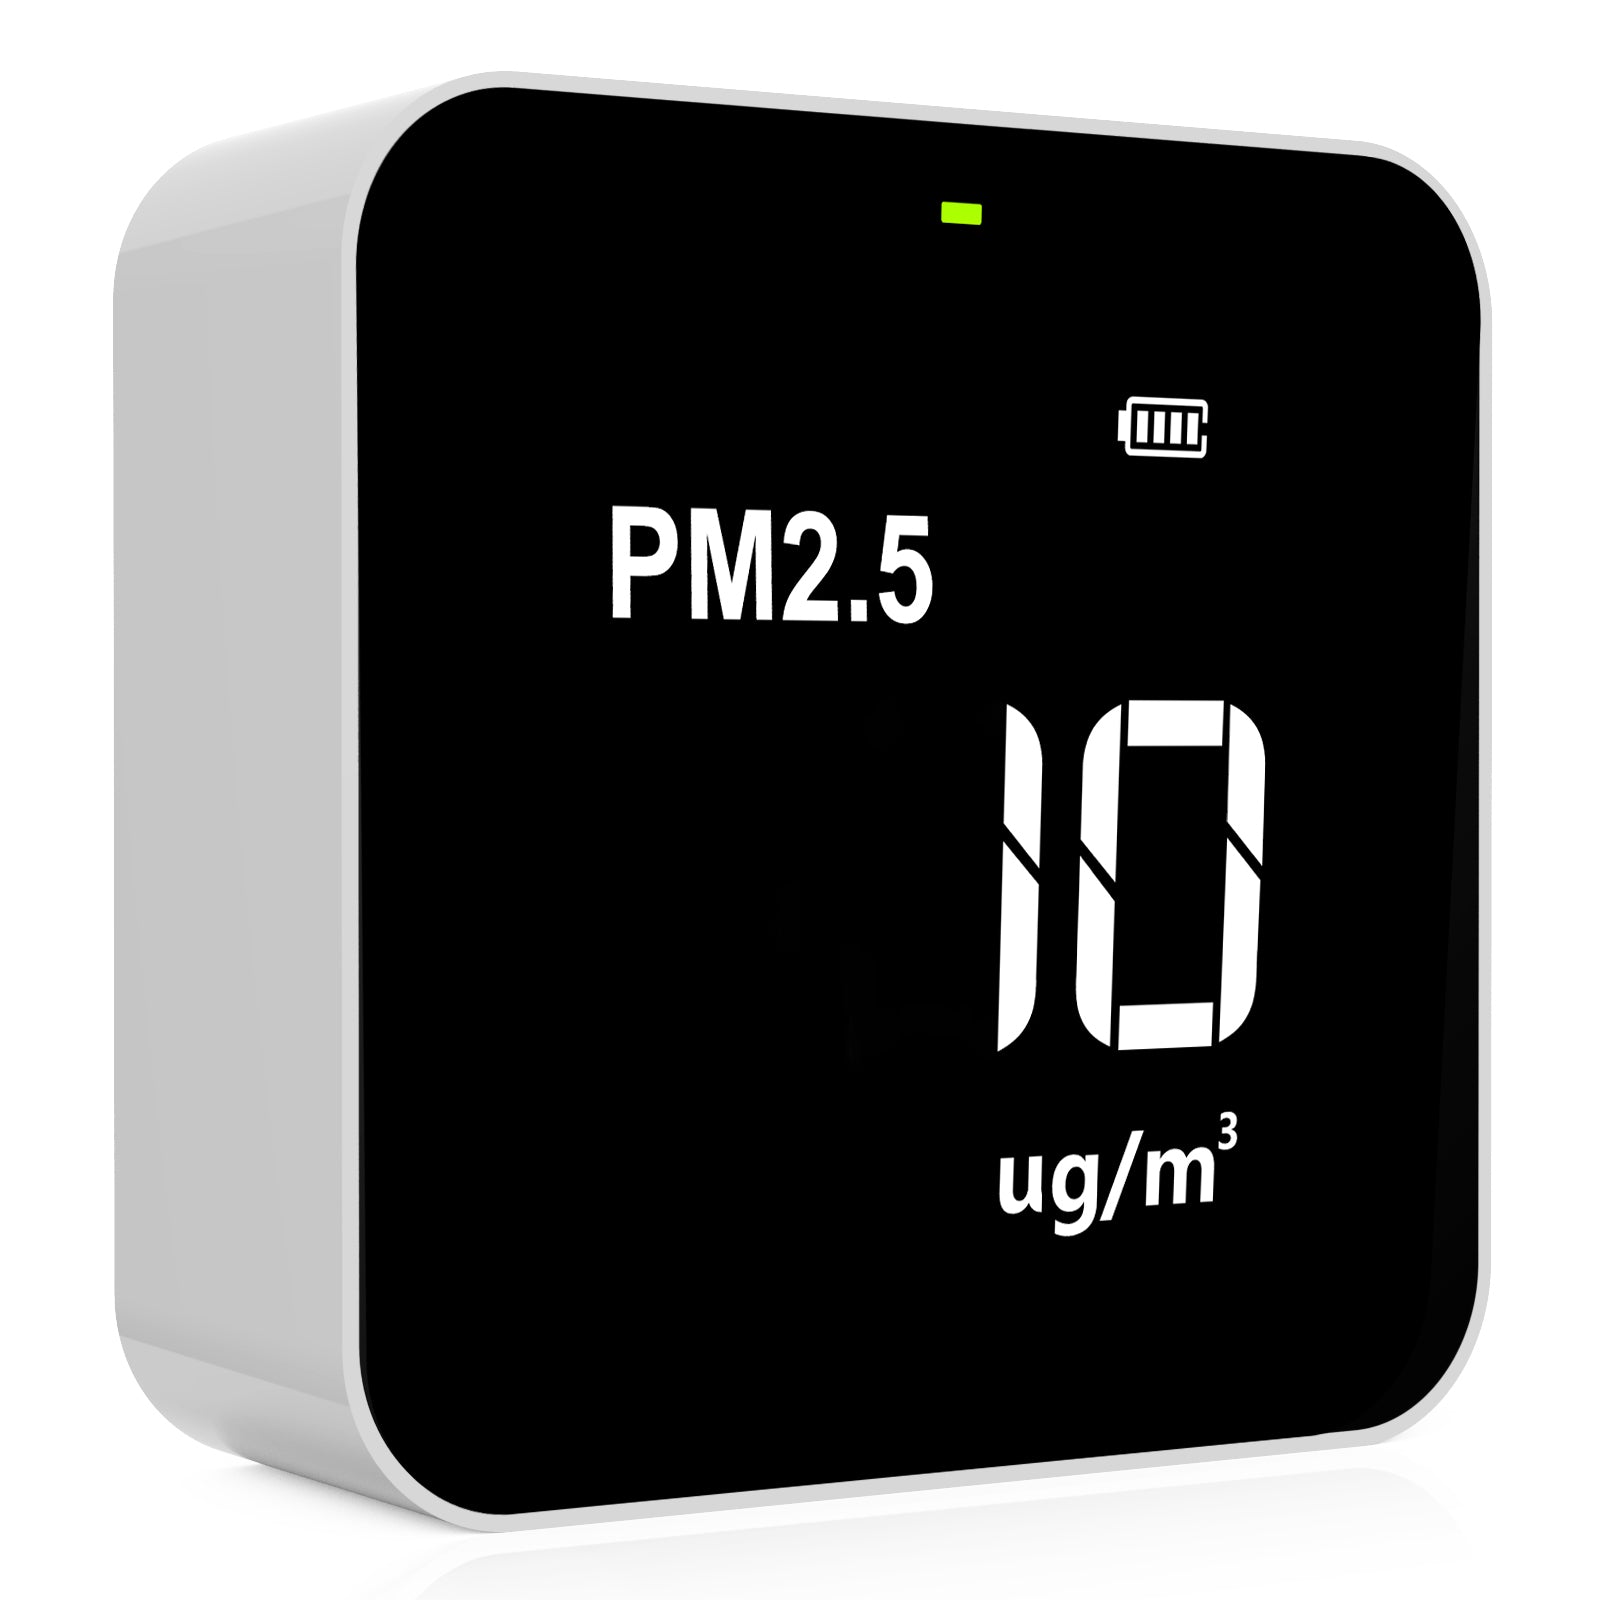 Temtop P10 Air Quality Monitor for PM2.5 AQI Real Time Display, Rechargeable Battery